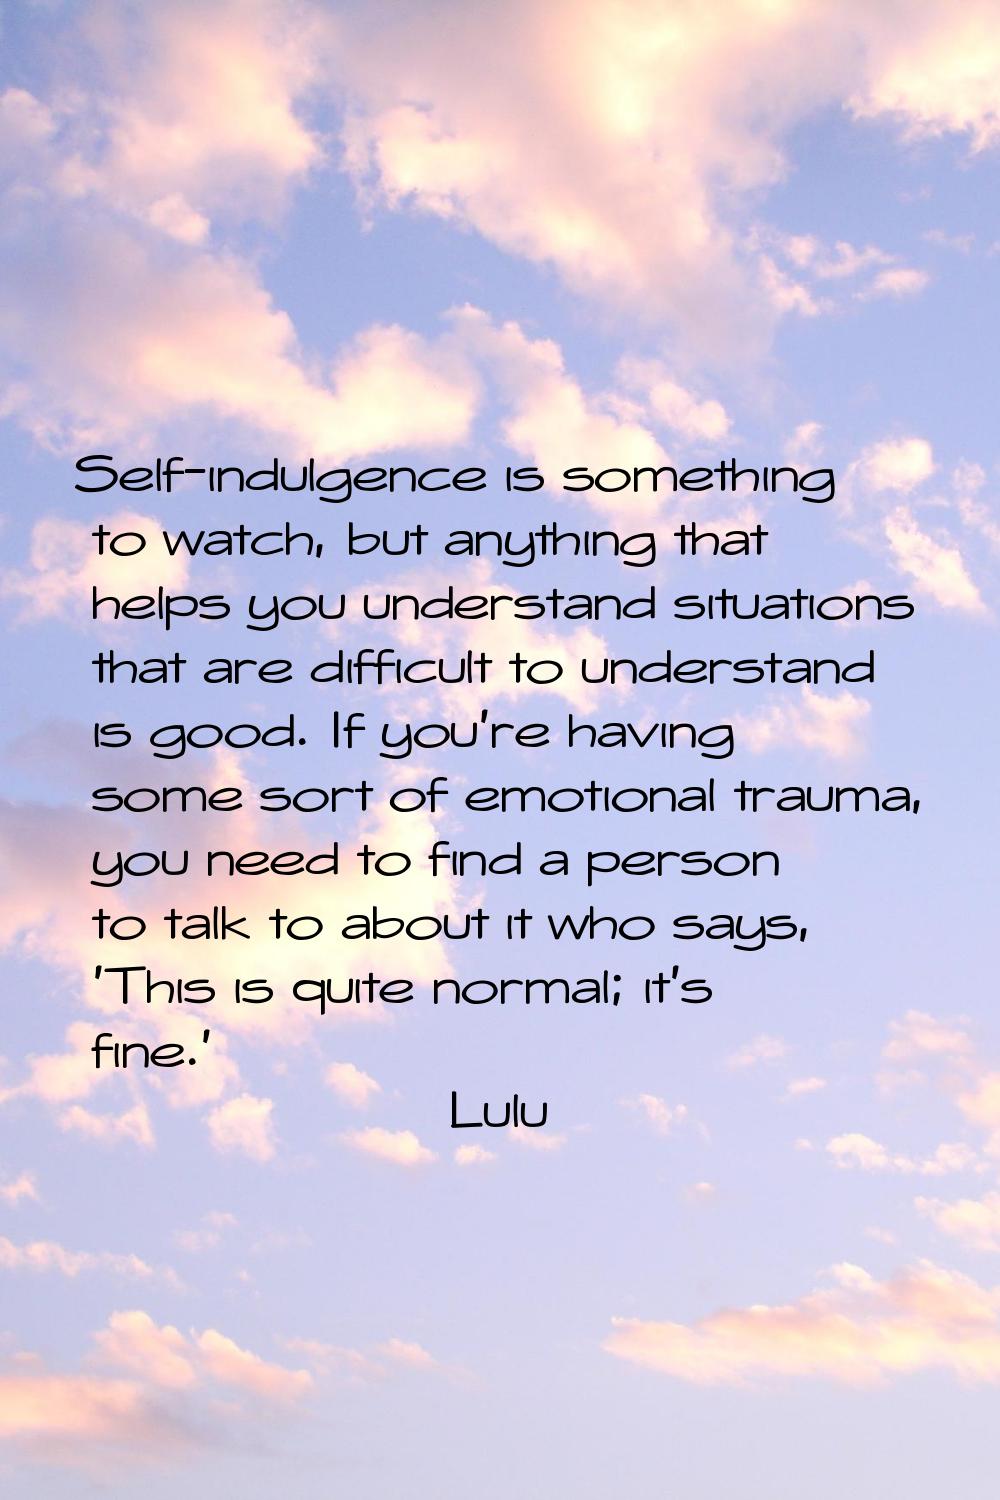 Self-indulgence is something to watch, but anything that helps you understand situations that are d